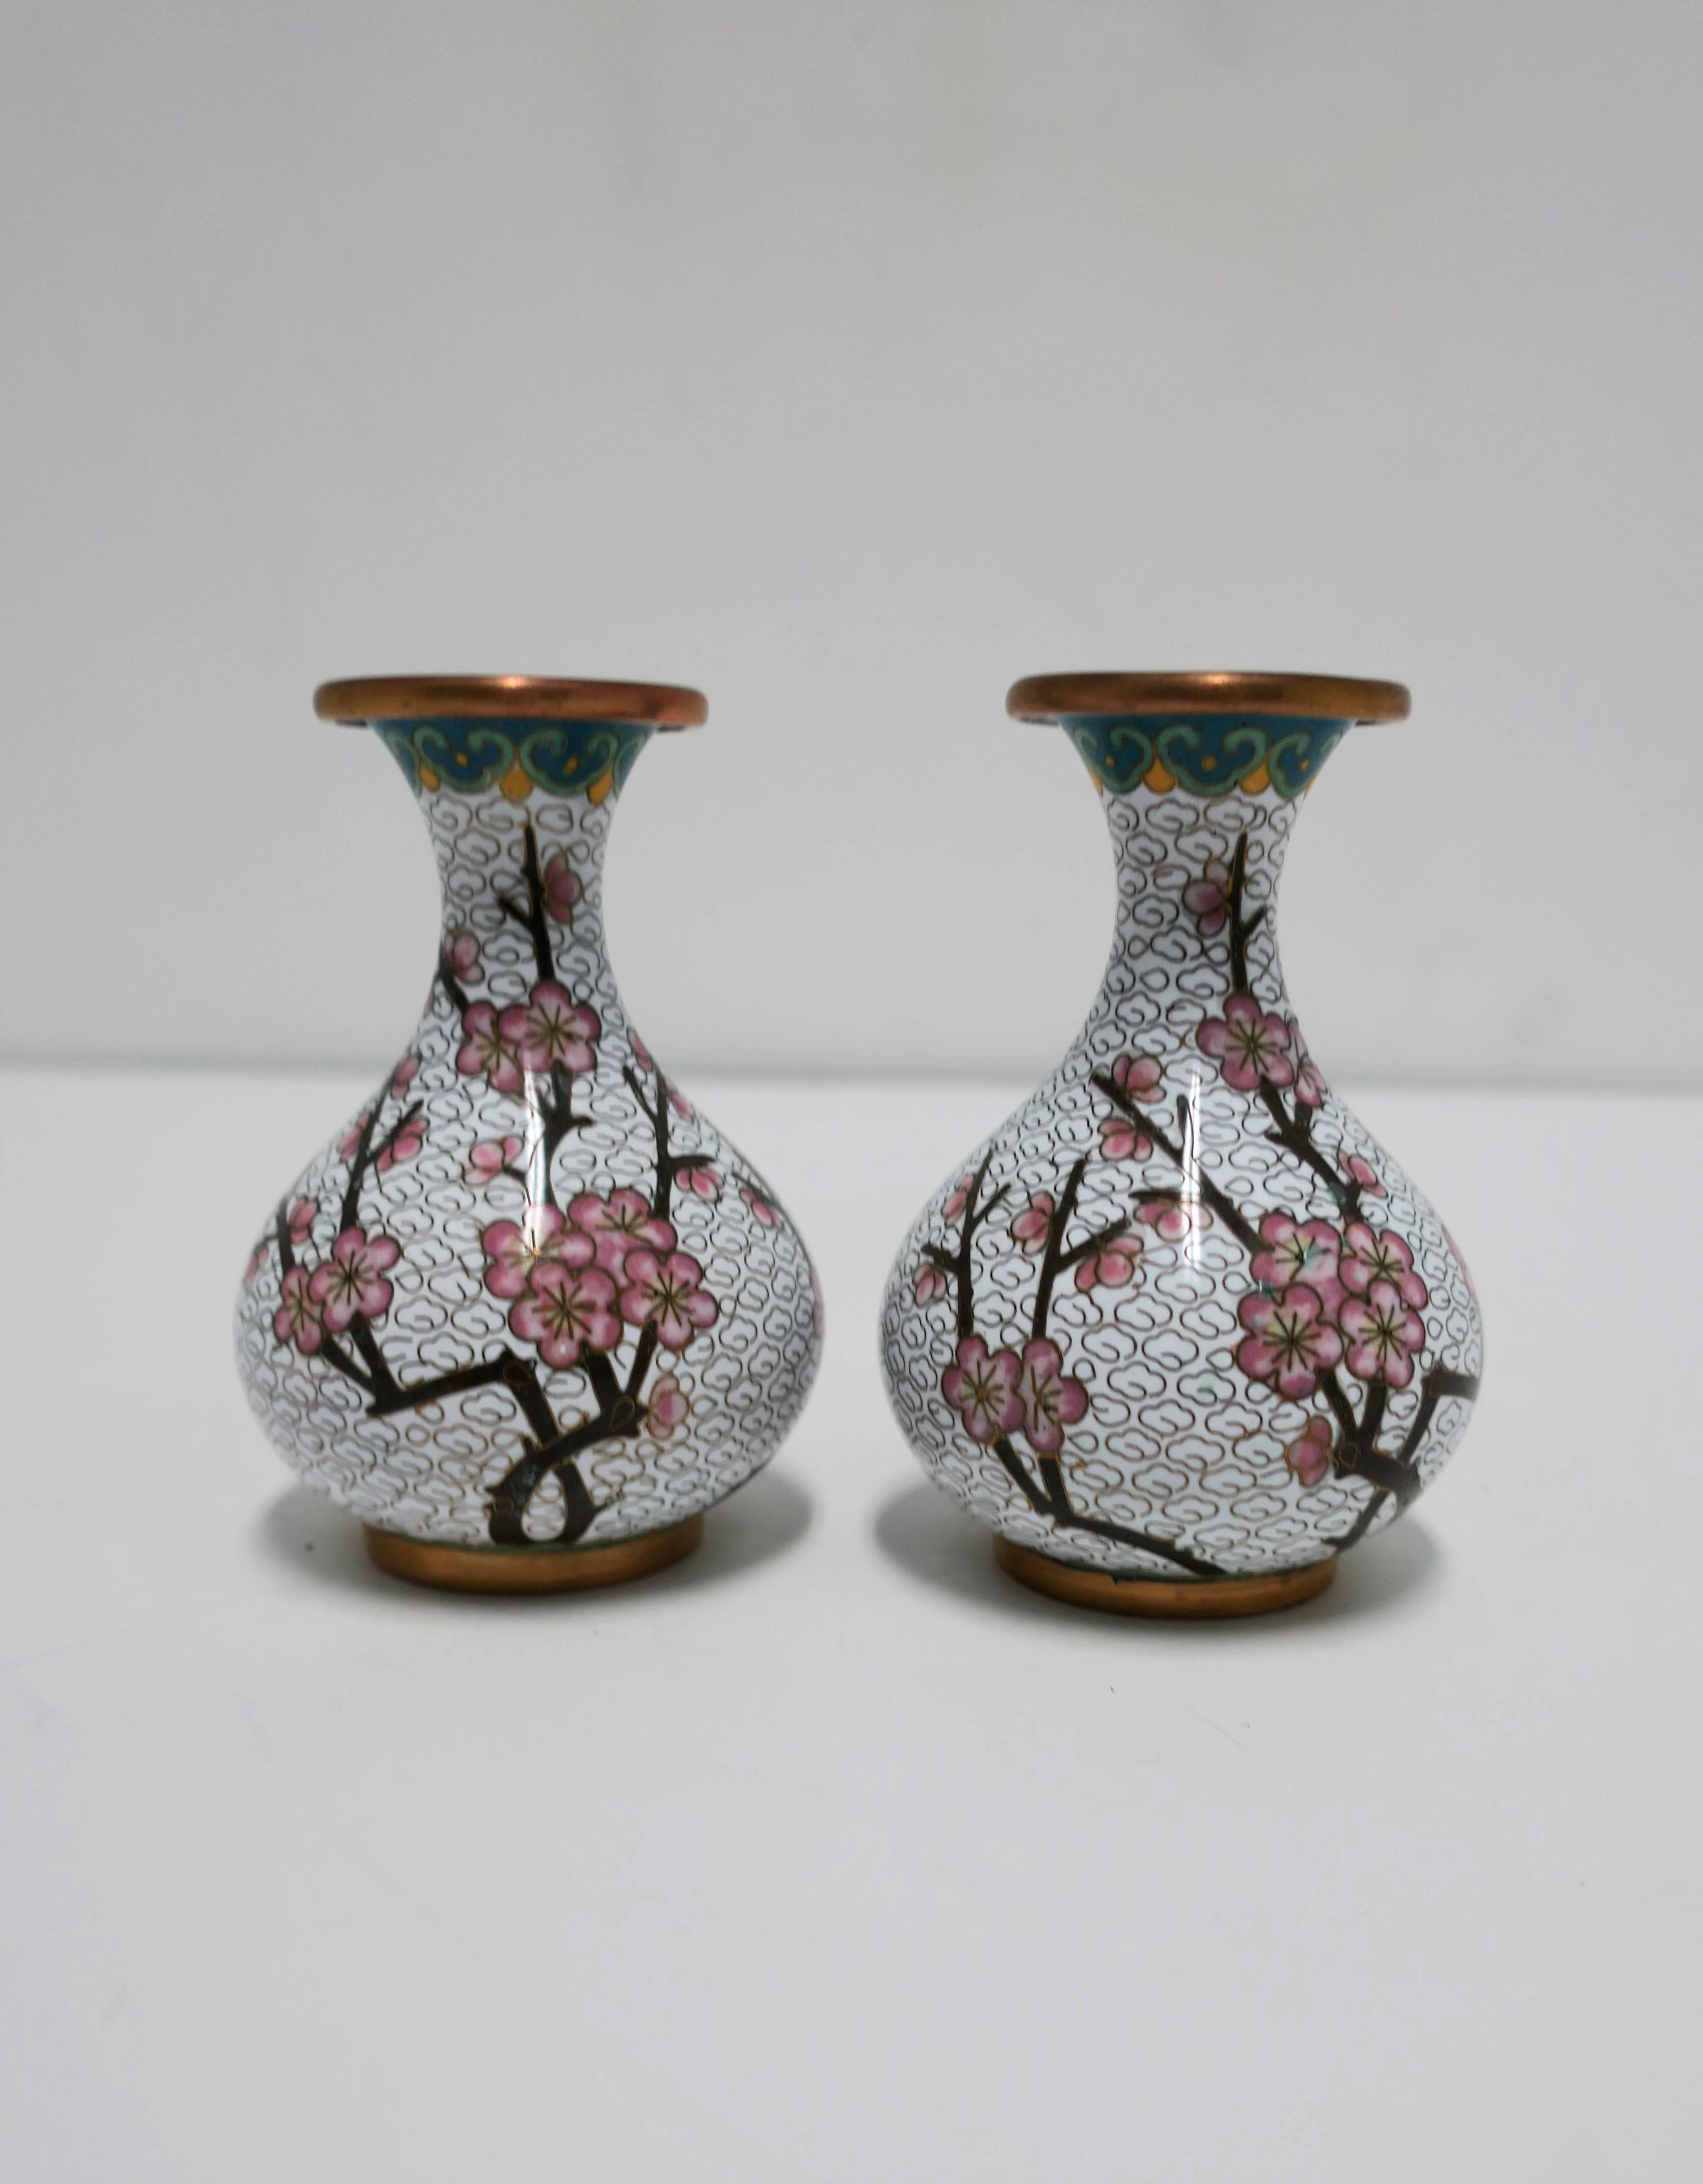 Japanese White and Pink Cloisonné Enamel Brass Vases with Cherry Blossom Design, Pair For Sale